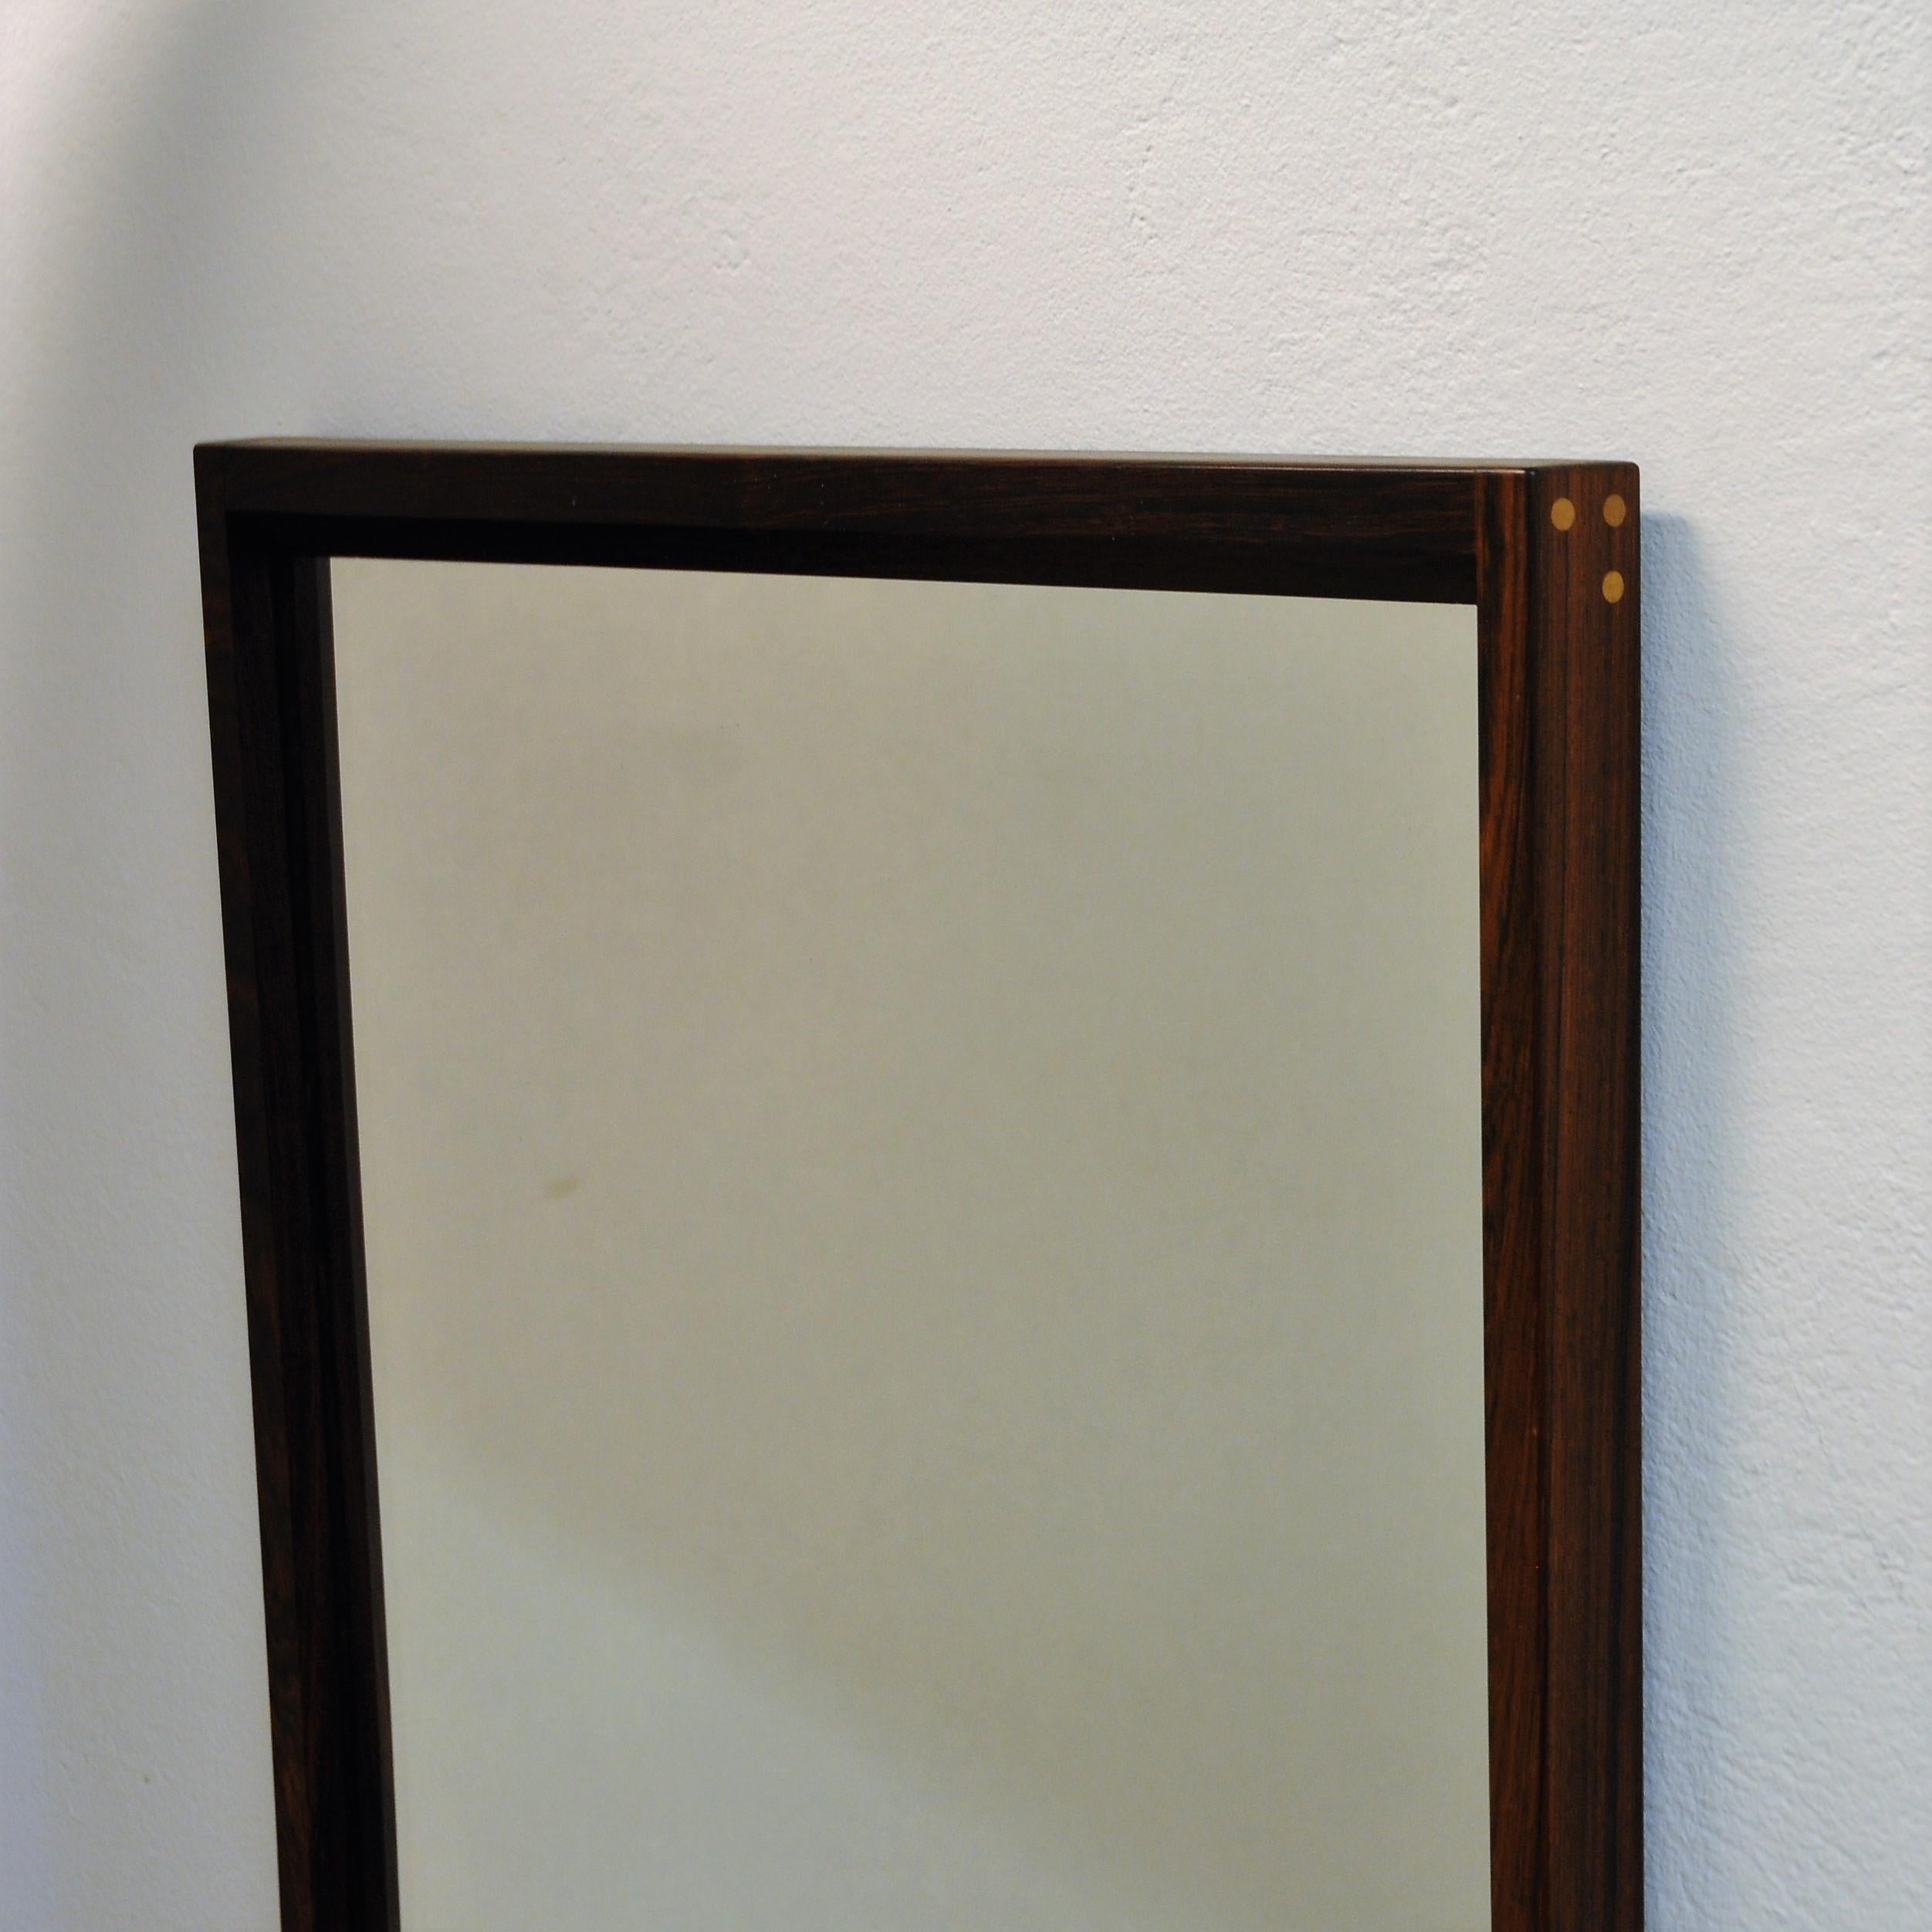 Danish rosewood wall mirror of by Aksel Kjersgaard, Denmark. Marked on the backside with Aksel Kjersgaard and numbered No 145 K. Produced by Odder. This mirror is of a great quality in construction and has beautiful details, such as the visible